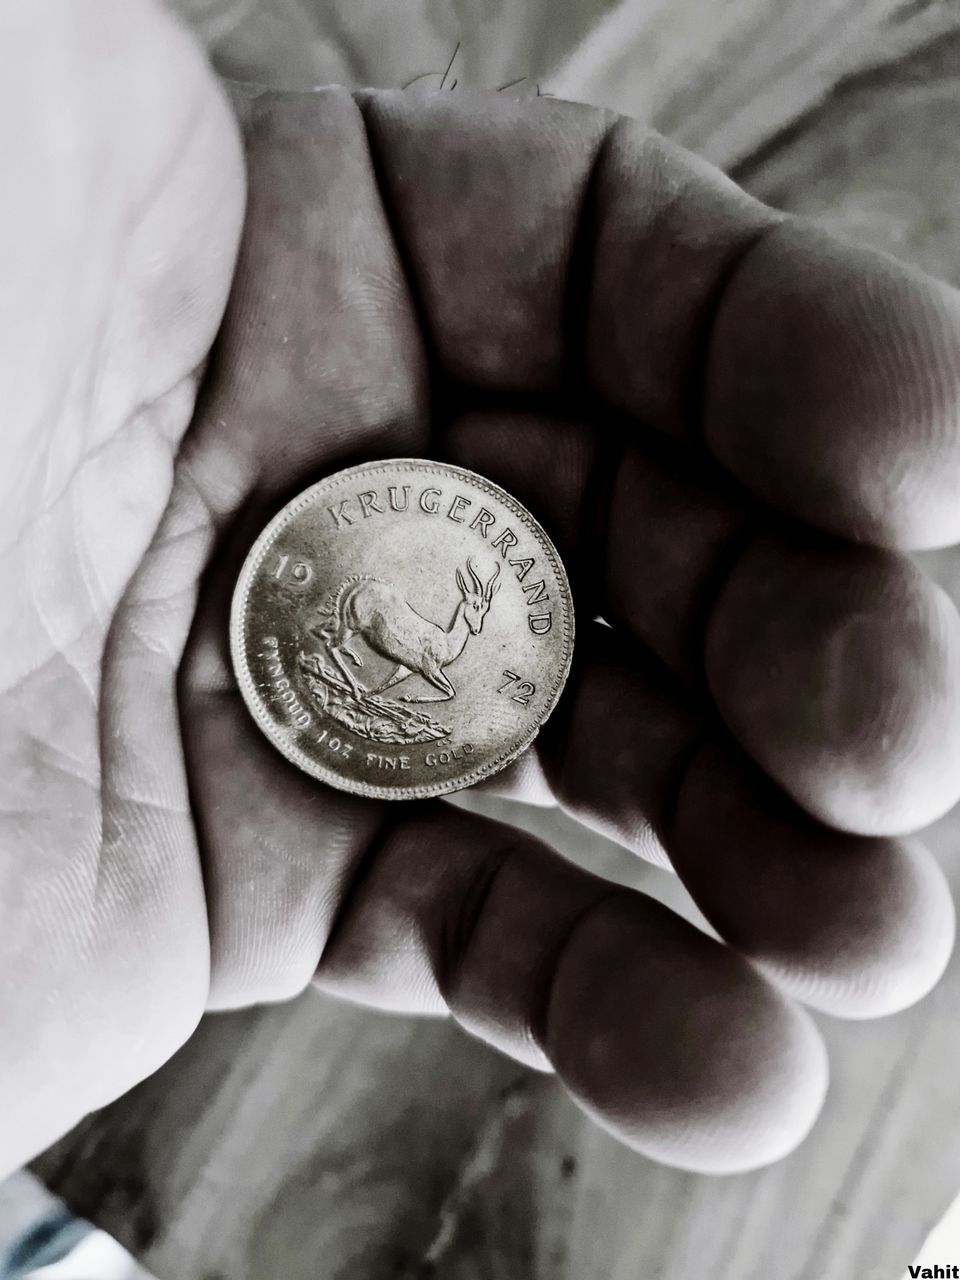 finance, hand, coin, currency, holding, black and white, one person, business, money, close-up, wealth, monochrome, savings, monochrome photography, cash, finance and economy, adult